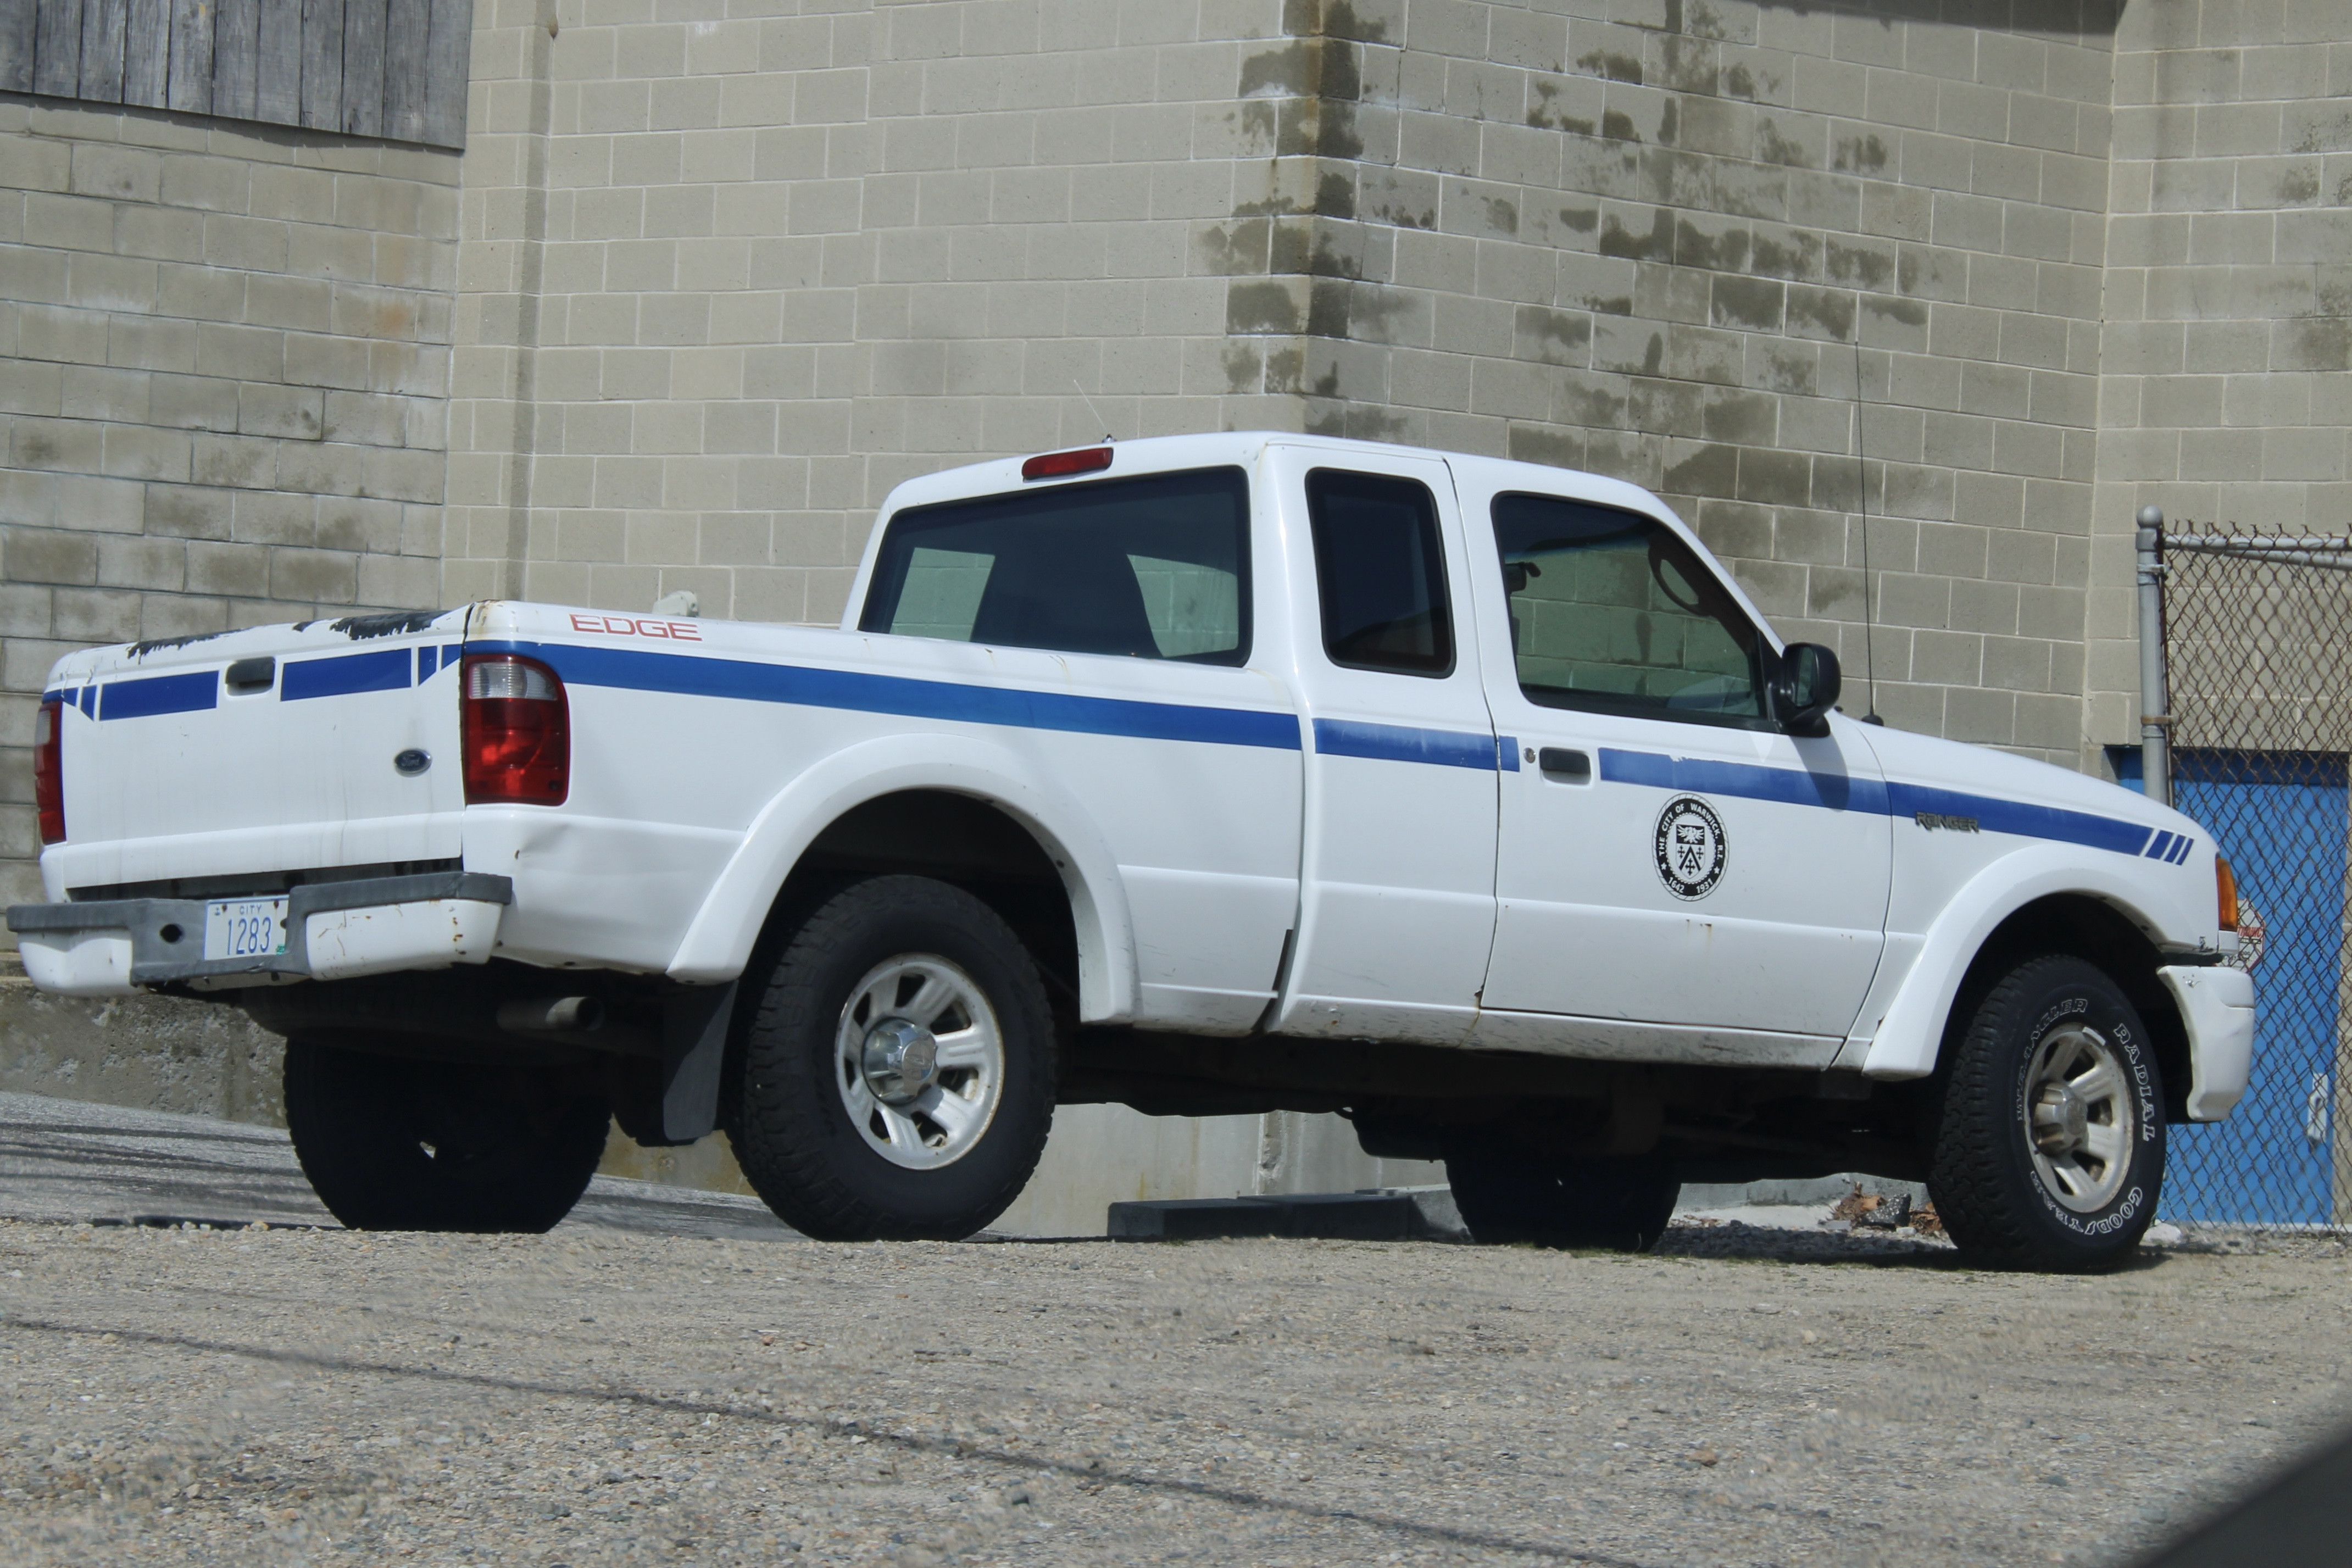 A photo  of Warwick Public Works
            Truck 1283, a 2004-2006 Ford Ranger Super Cab             taken by @riemergencyvehicles